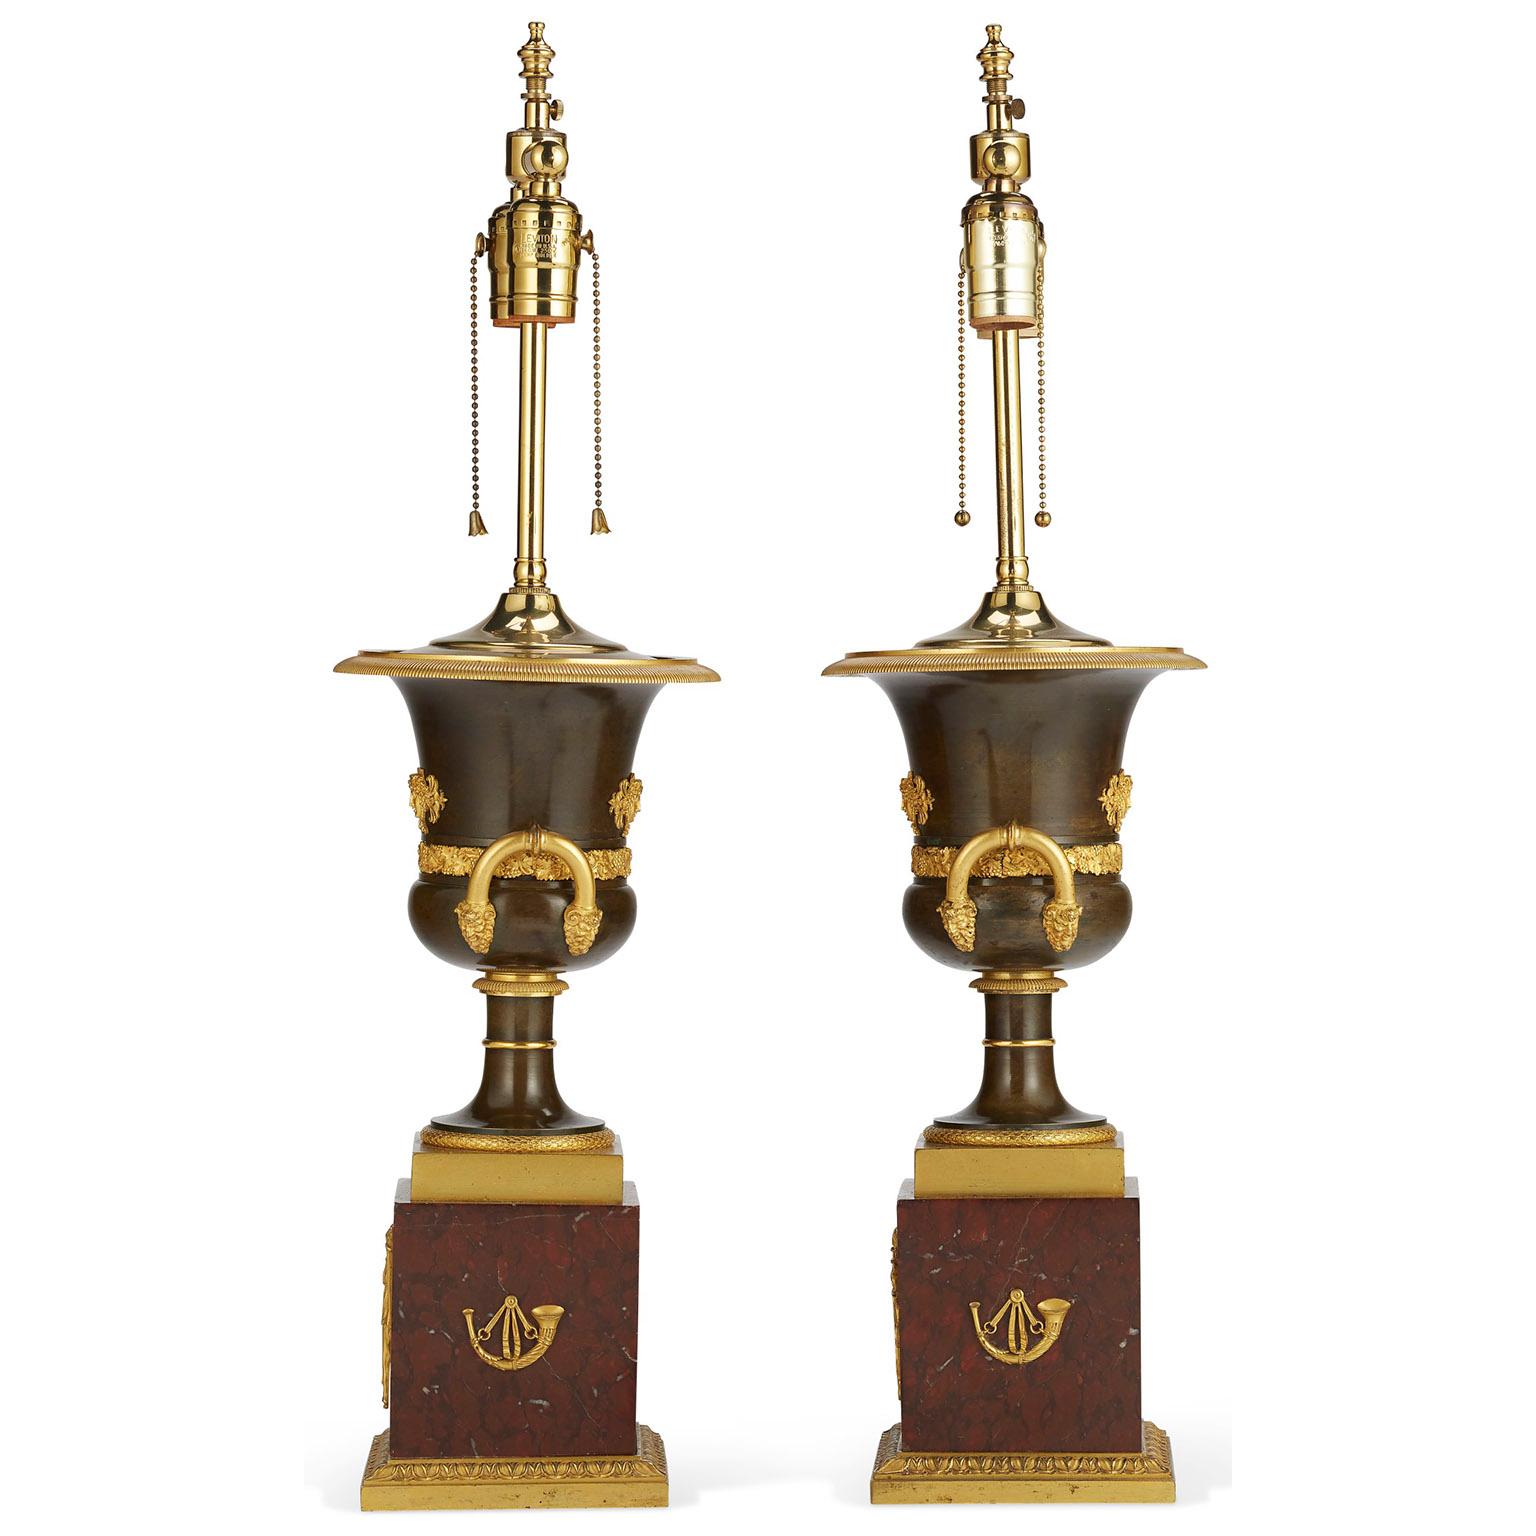 Pair French 19th Century Napoleon III Empire Style Gilt-Bronze Urn Table Lamps For Sale 3